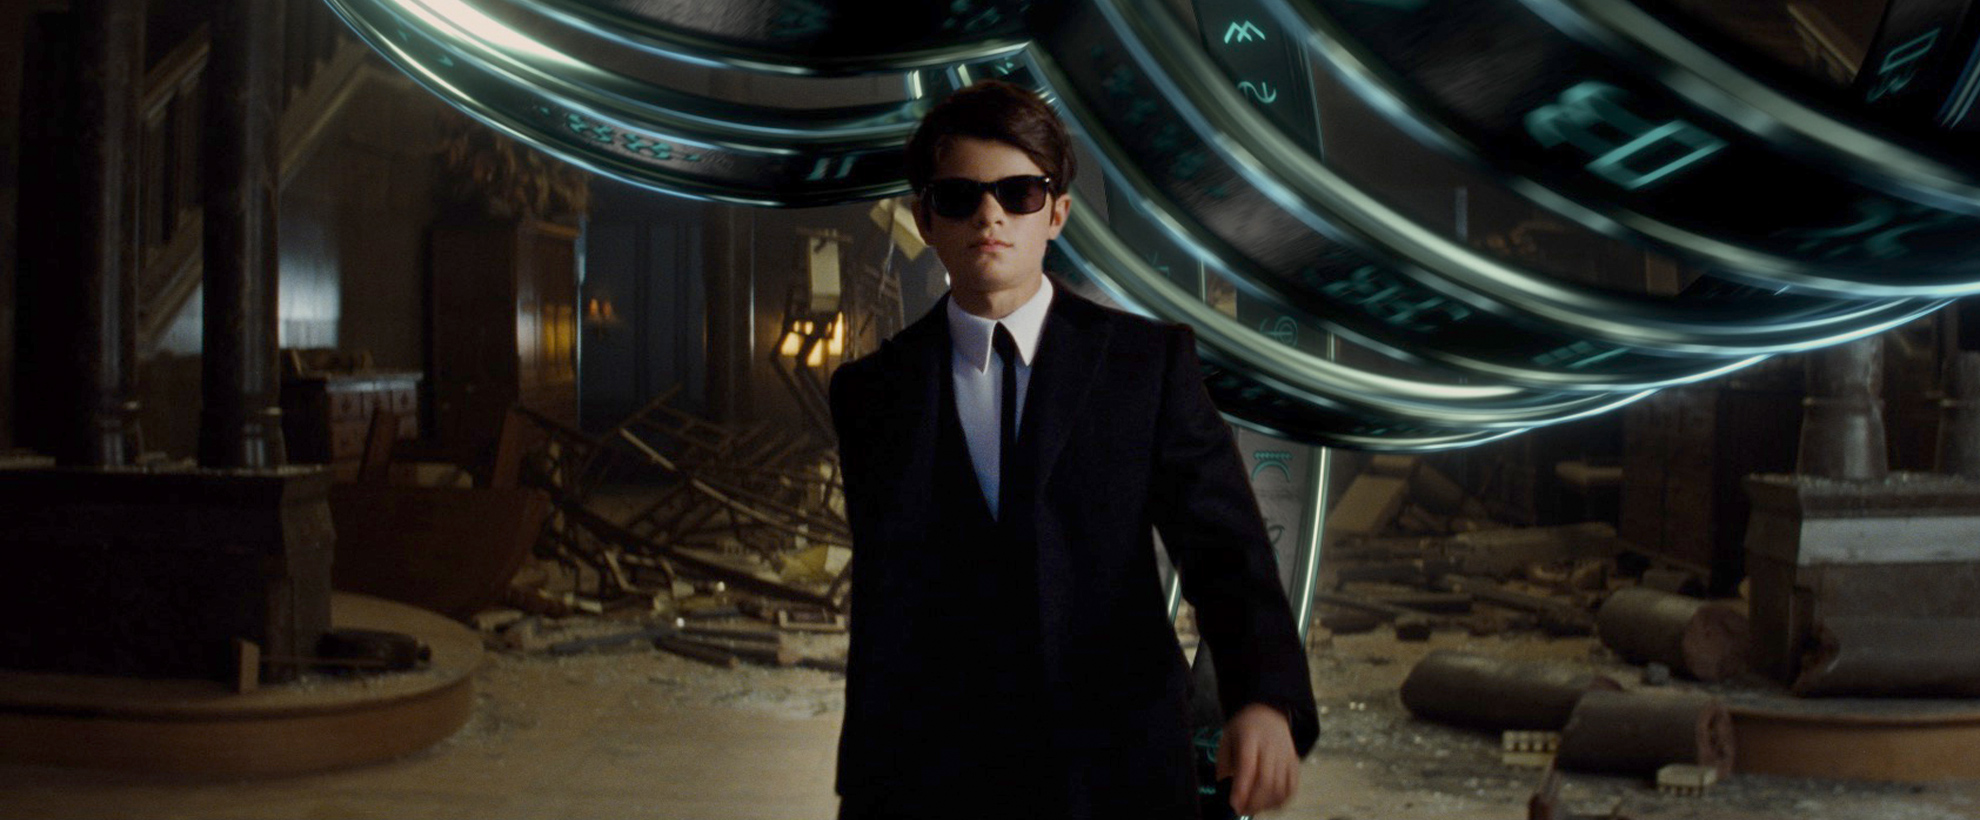 A young boy in a black suit and sunglasses walks towards the camera